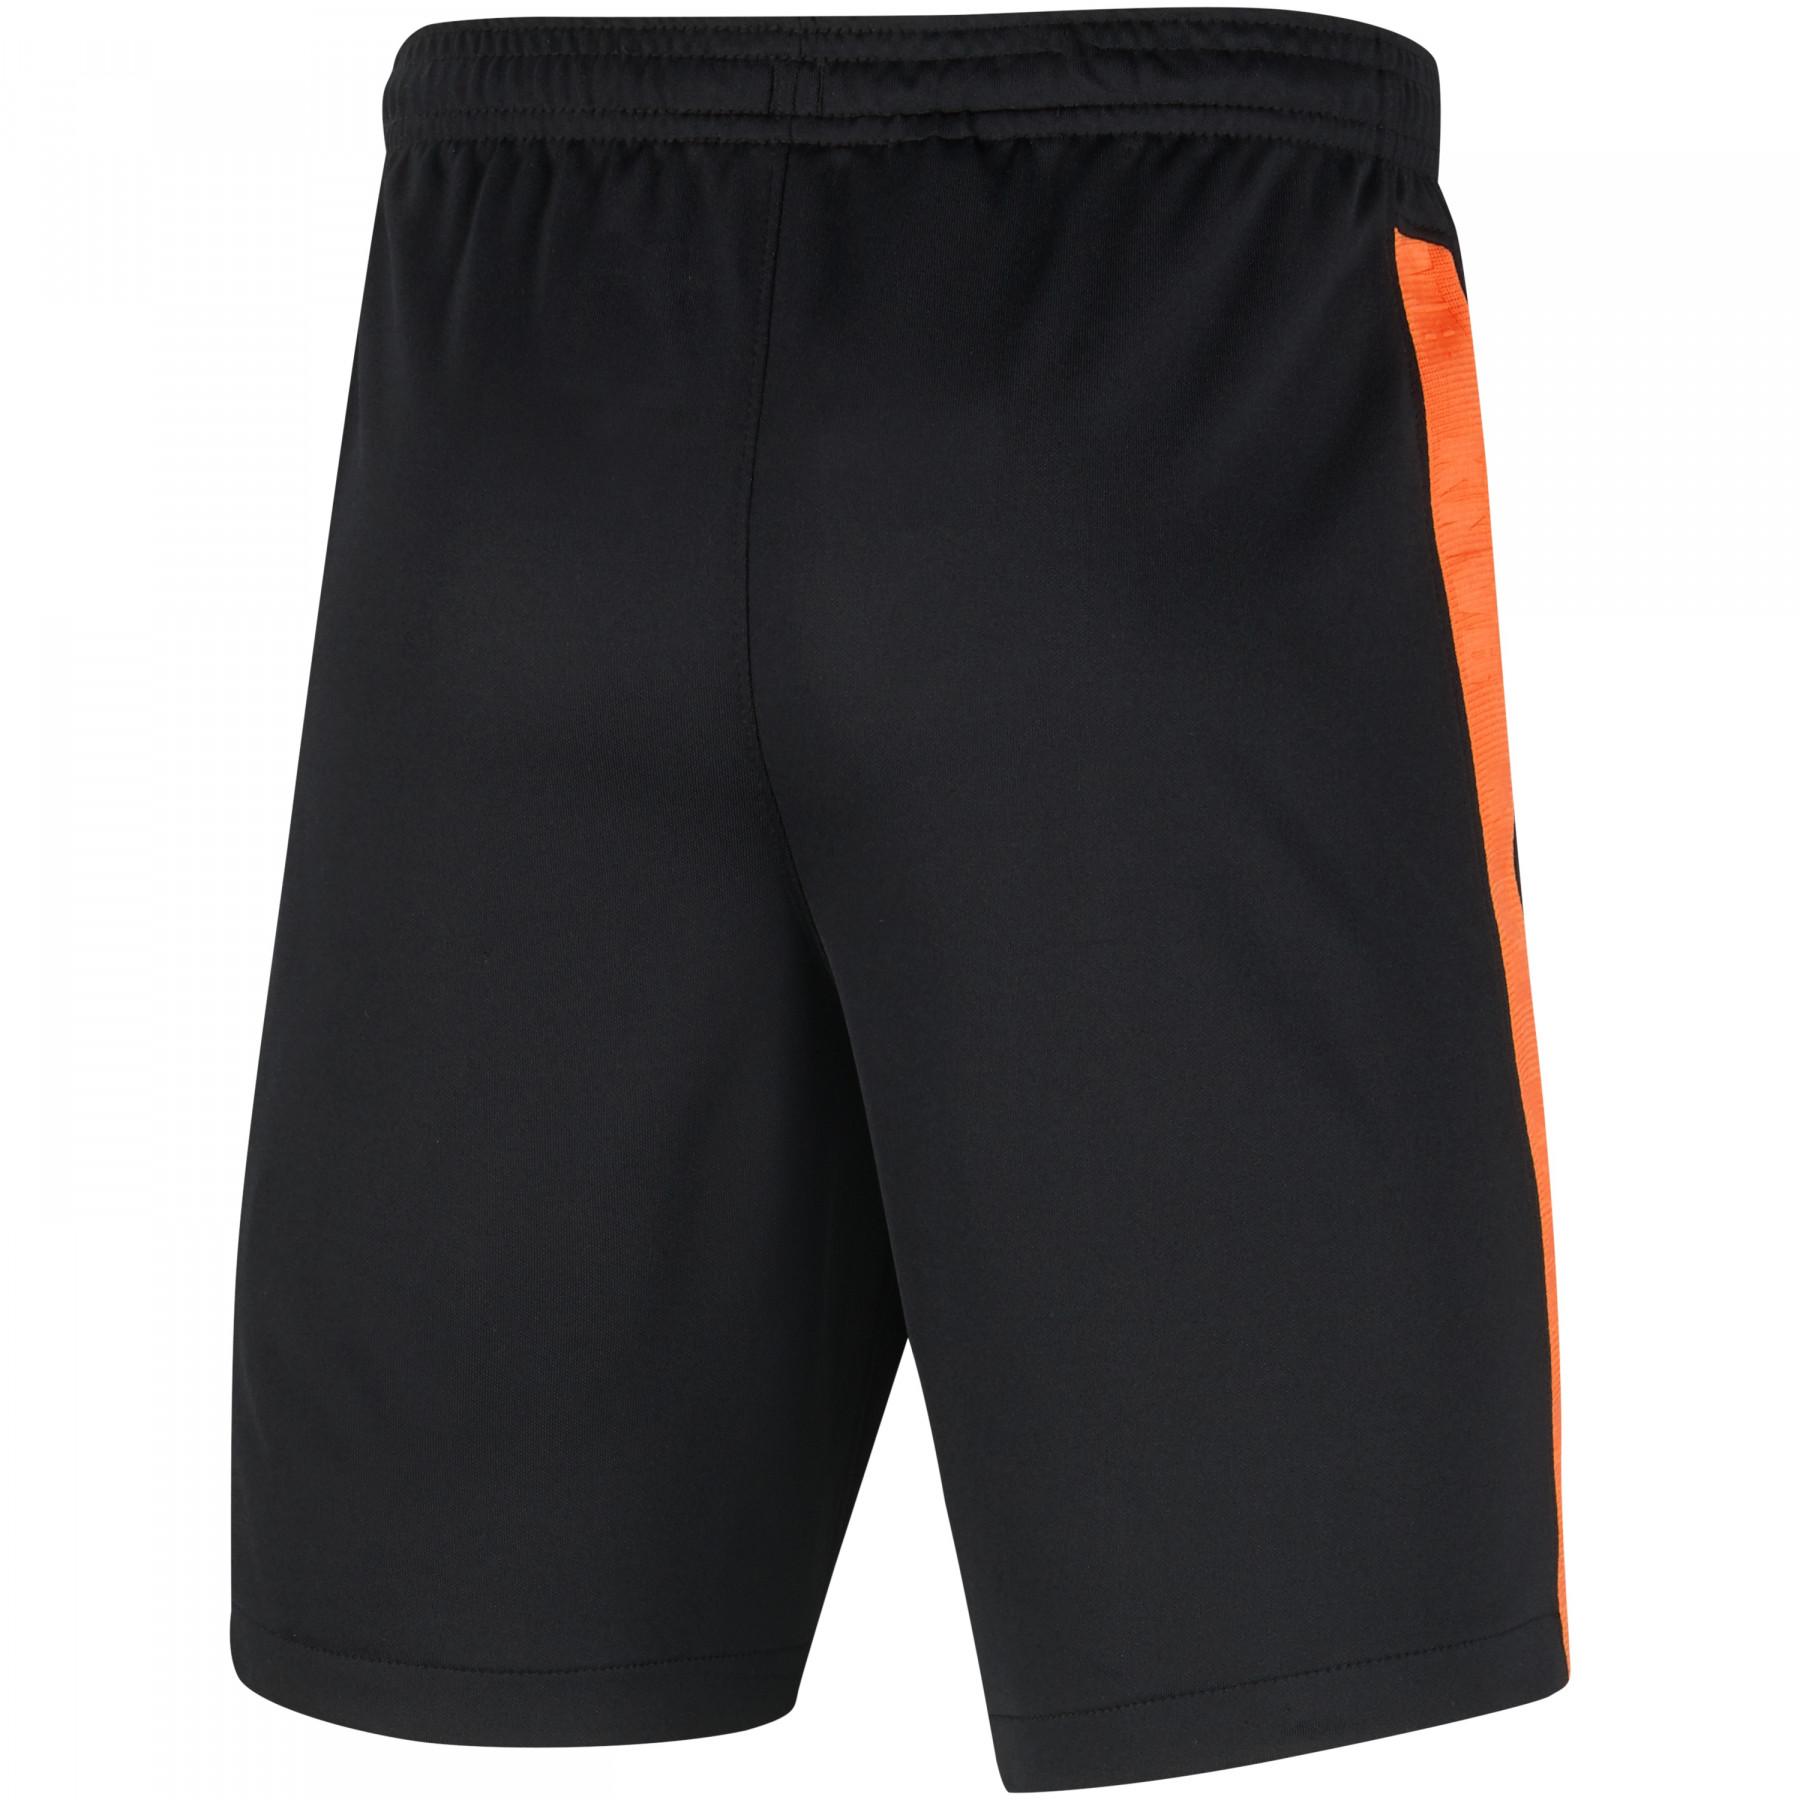 Kinder-Outdoor-Shorts Pays-Bas 2020